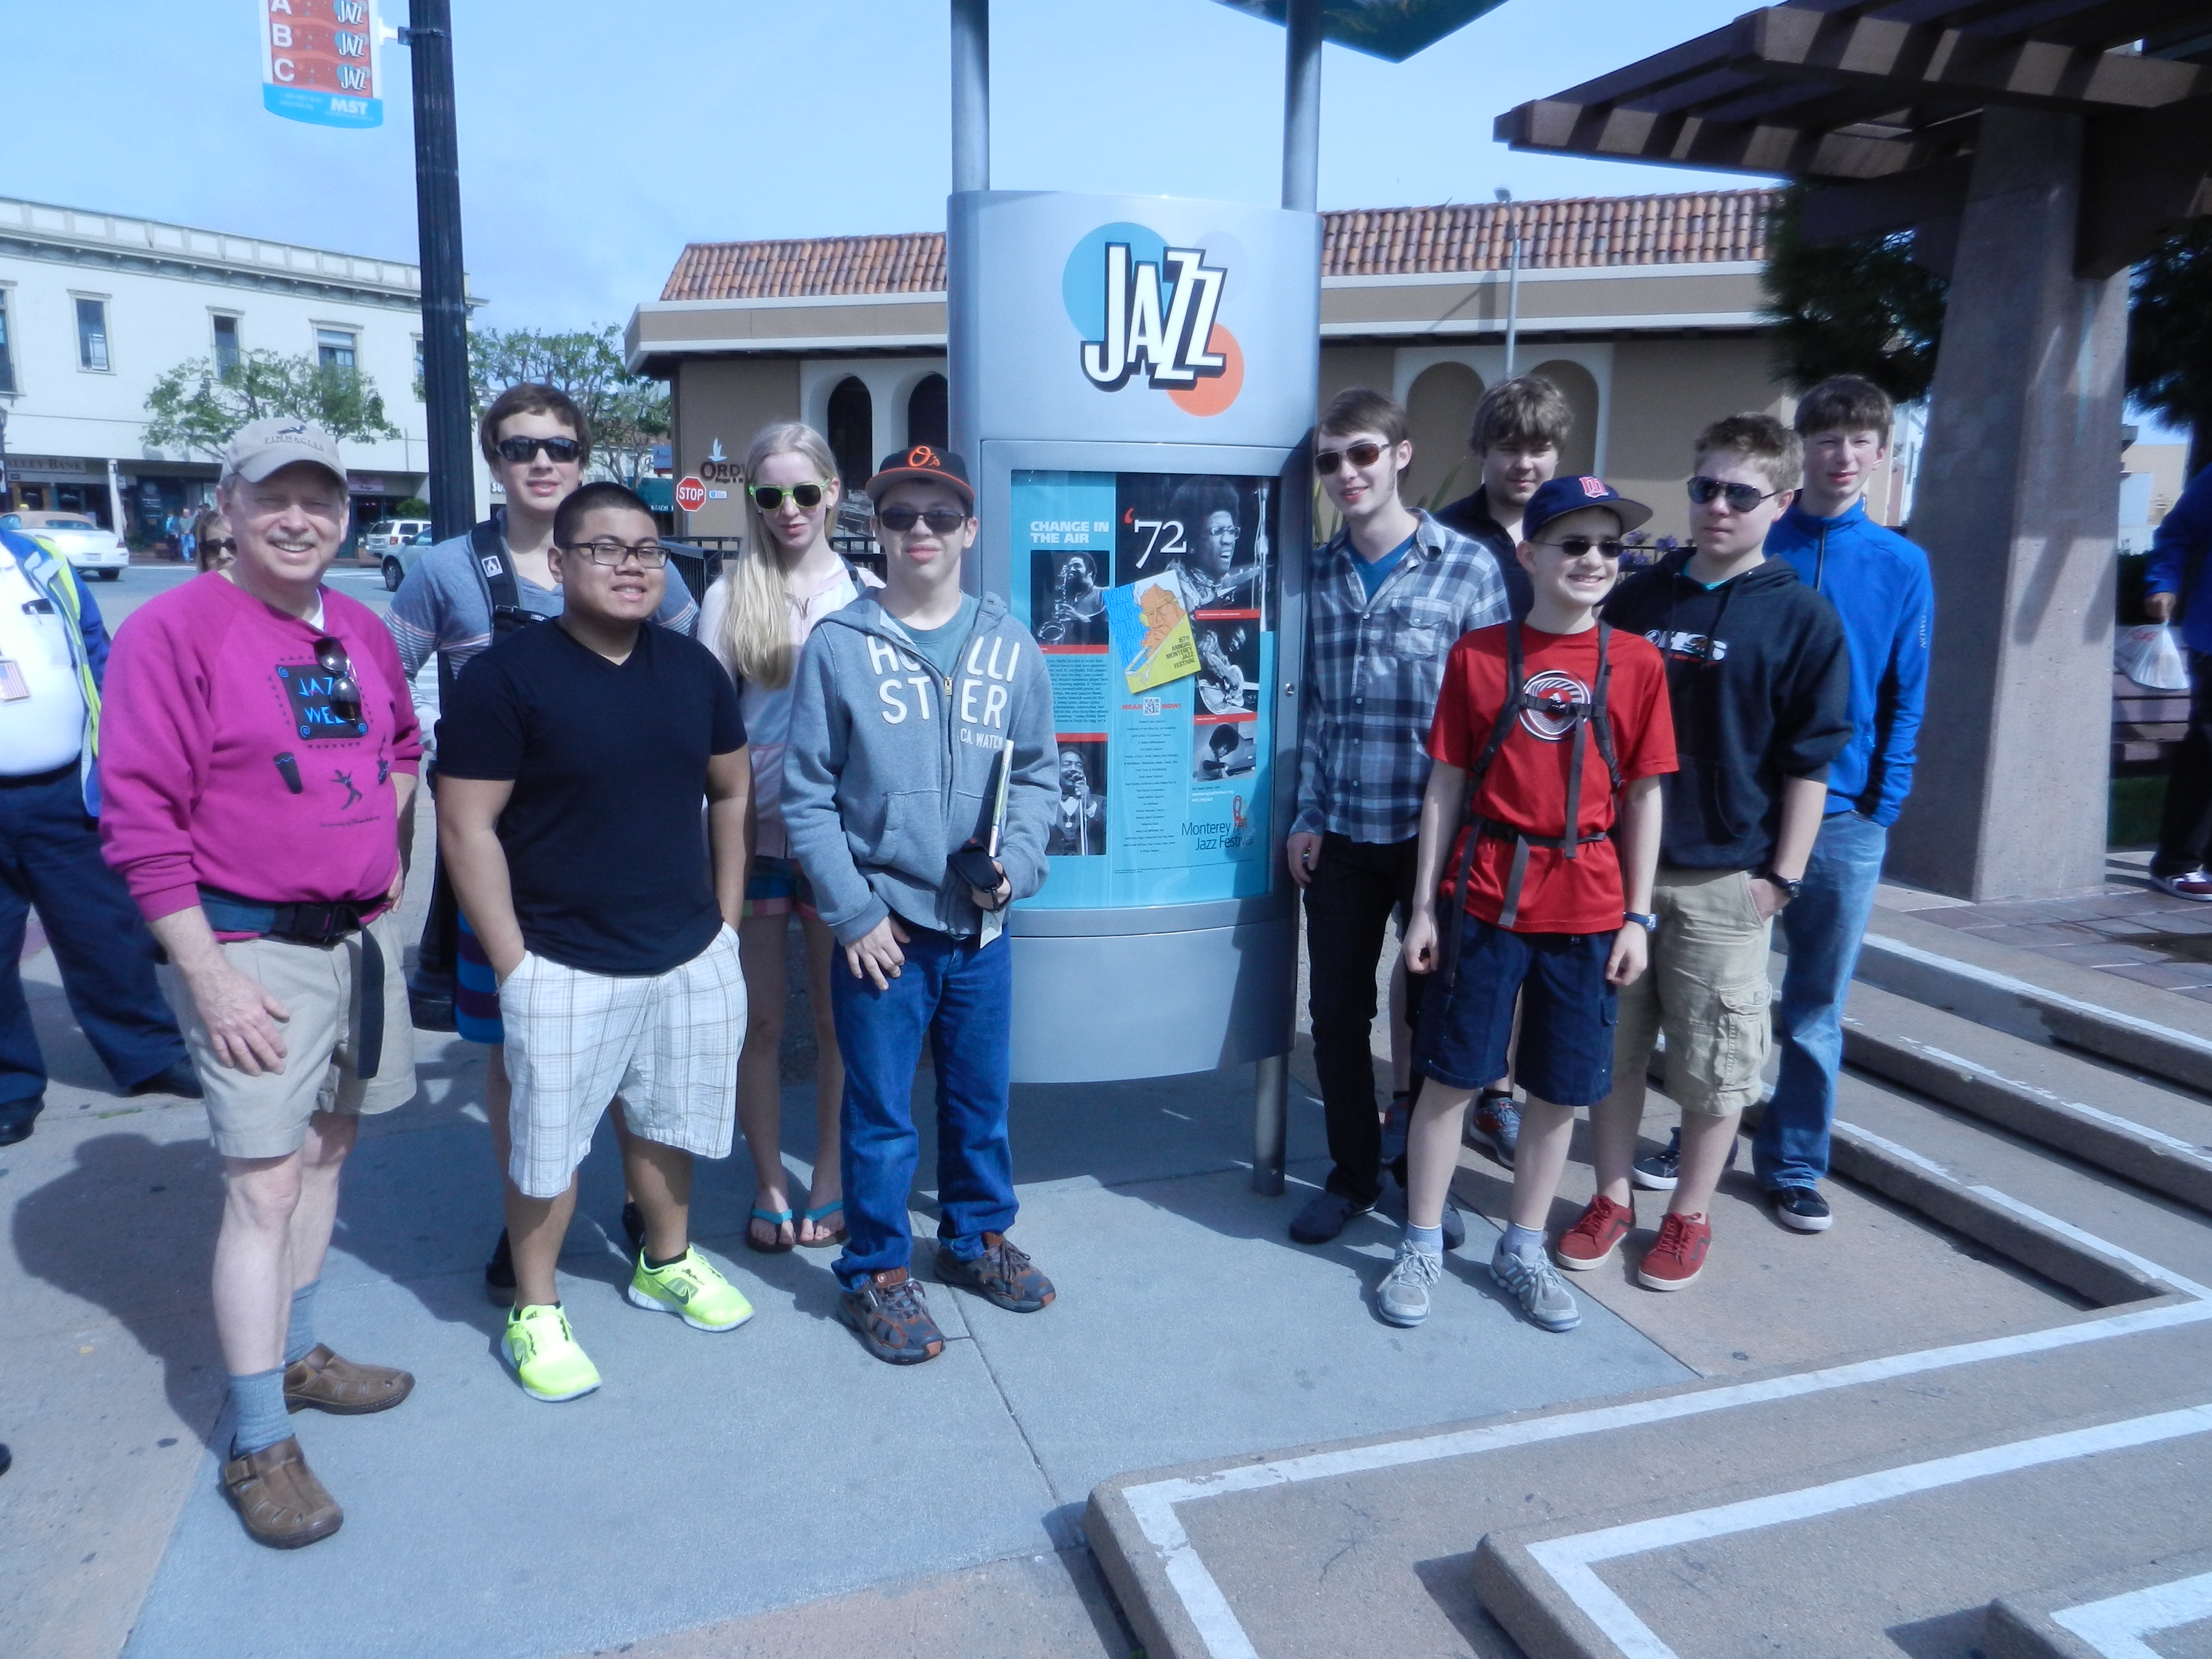 Students on field trip to Next Generation Jazz event in Monterey California.